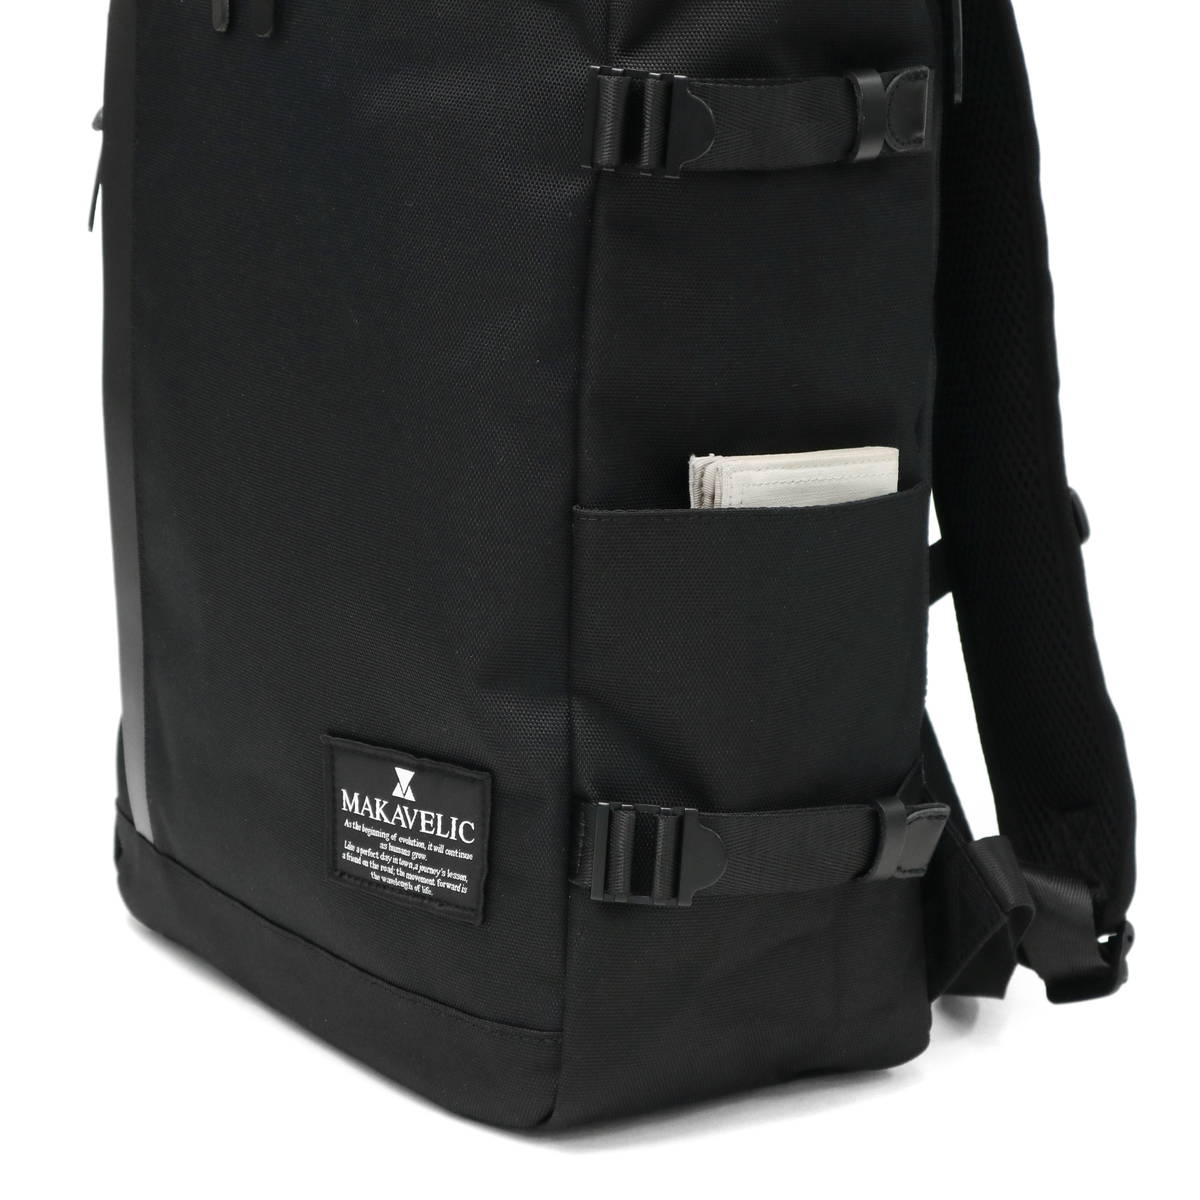 MAKAVELIC マキャベリック CHASE RECTANGLE DAYPACK 25L 3106-10121